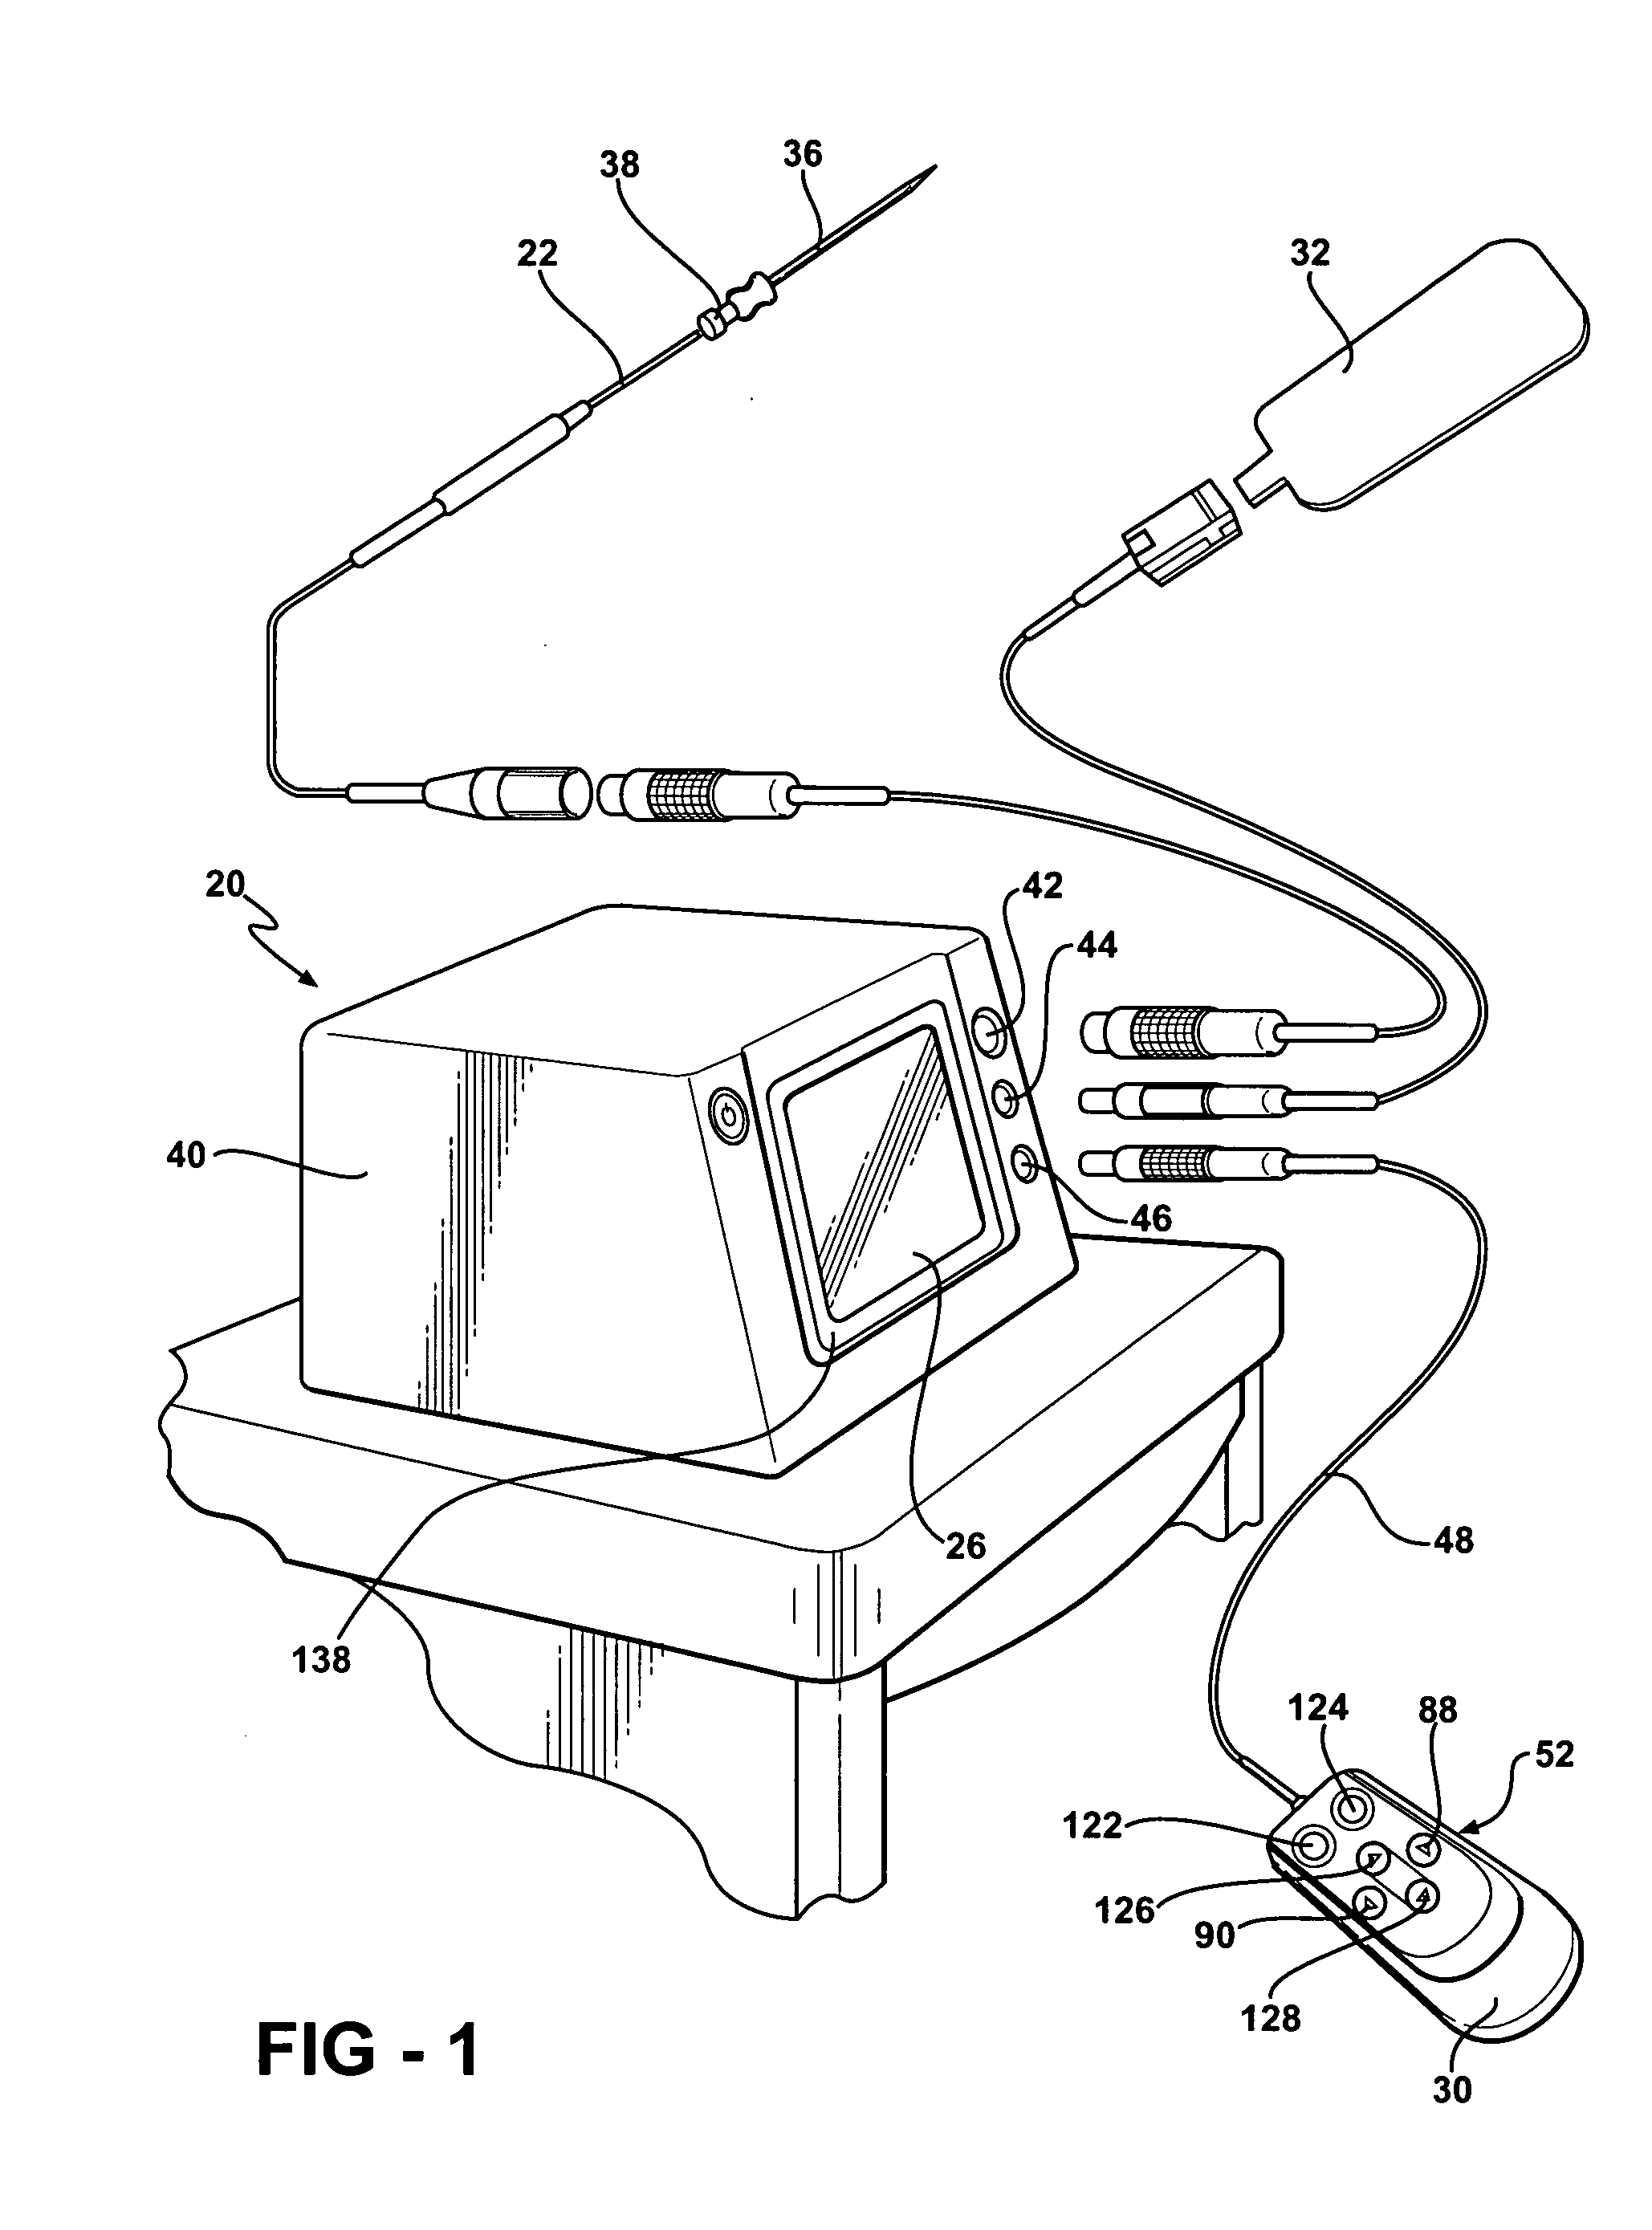 System and method for controlling electrical stimulation and radiofrequency output for use in an electrosurgical procedure